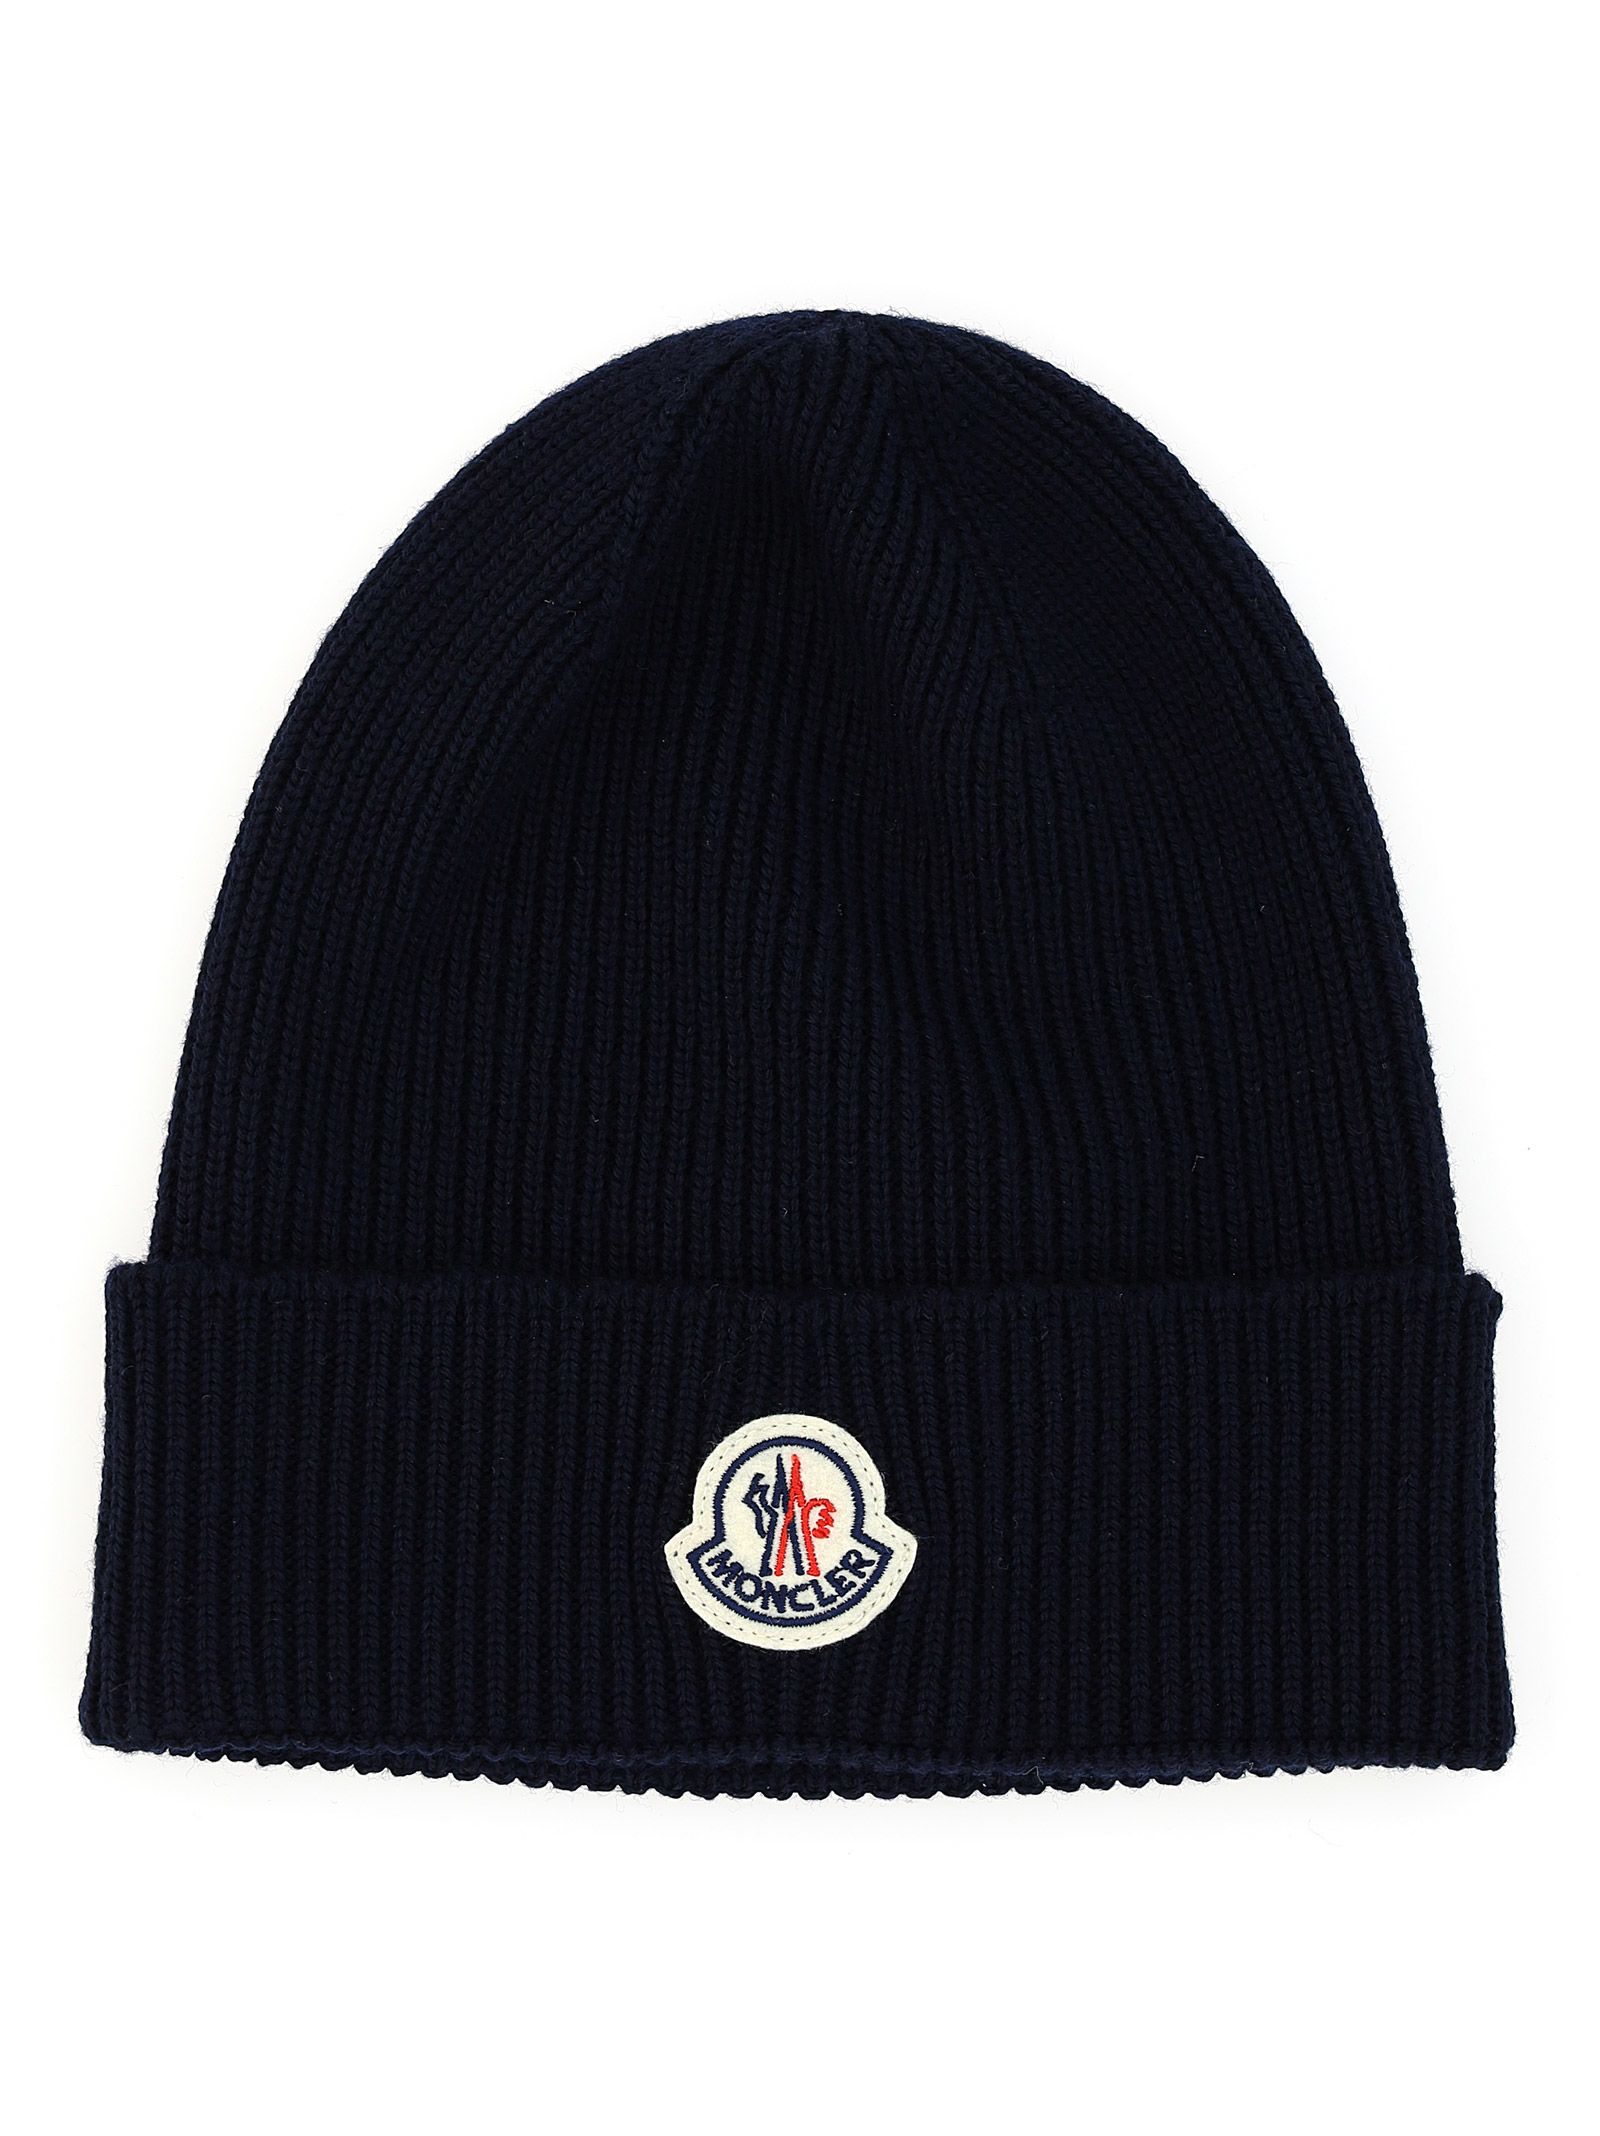 Moncler Hats | italist, ALWAYS LIKE A SALE